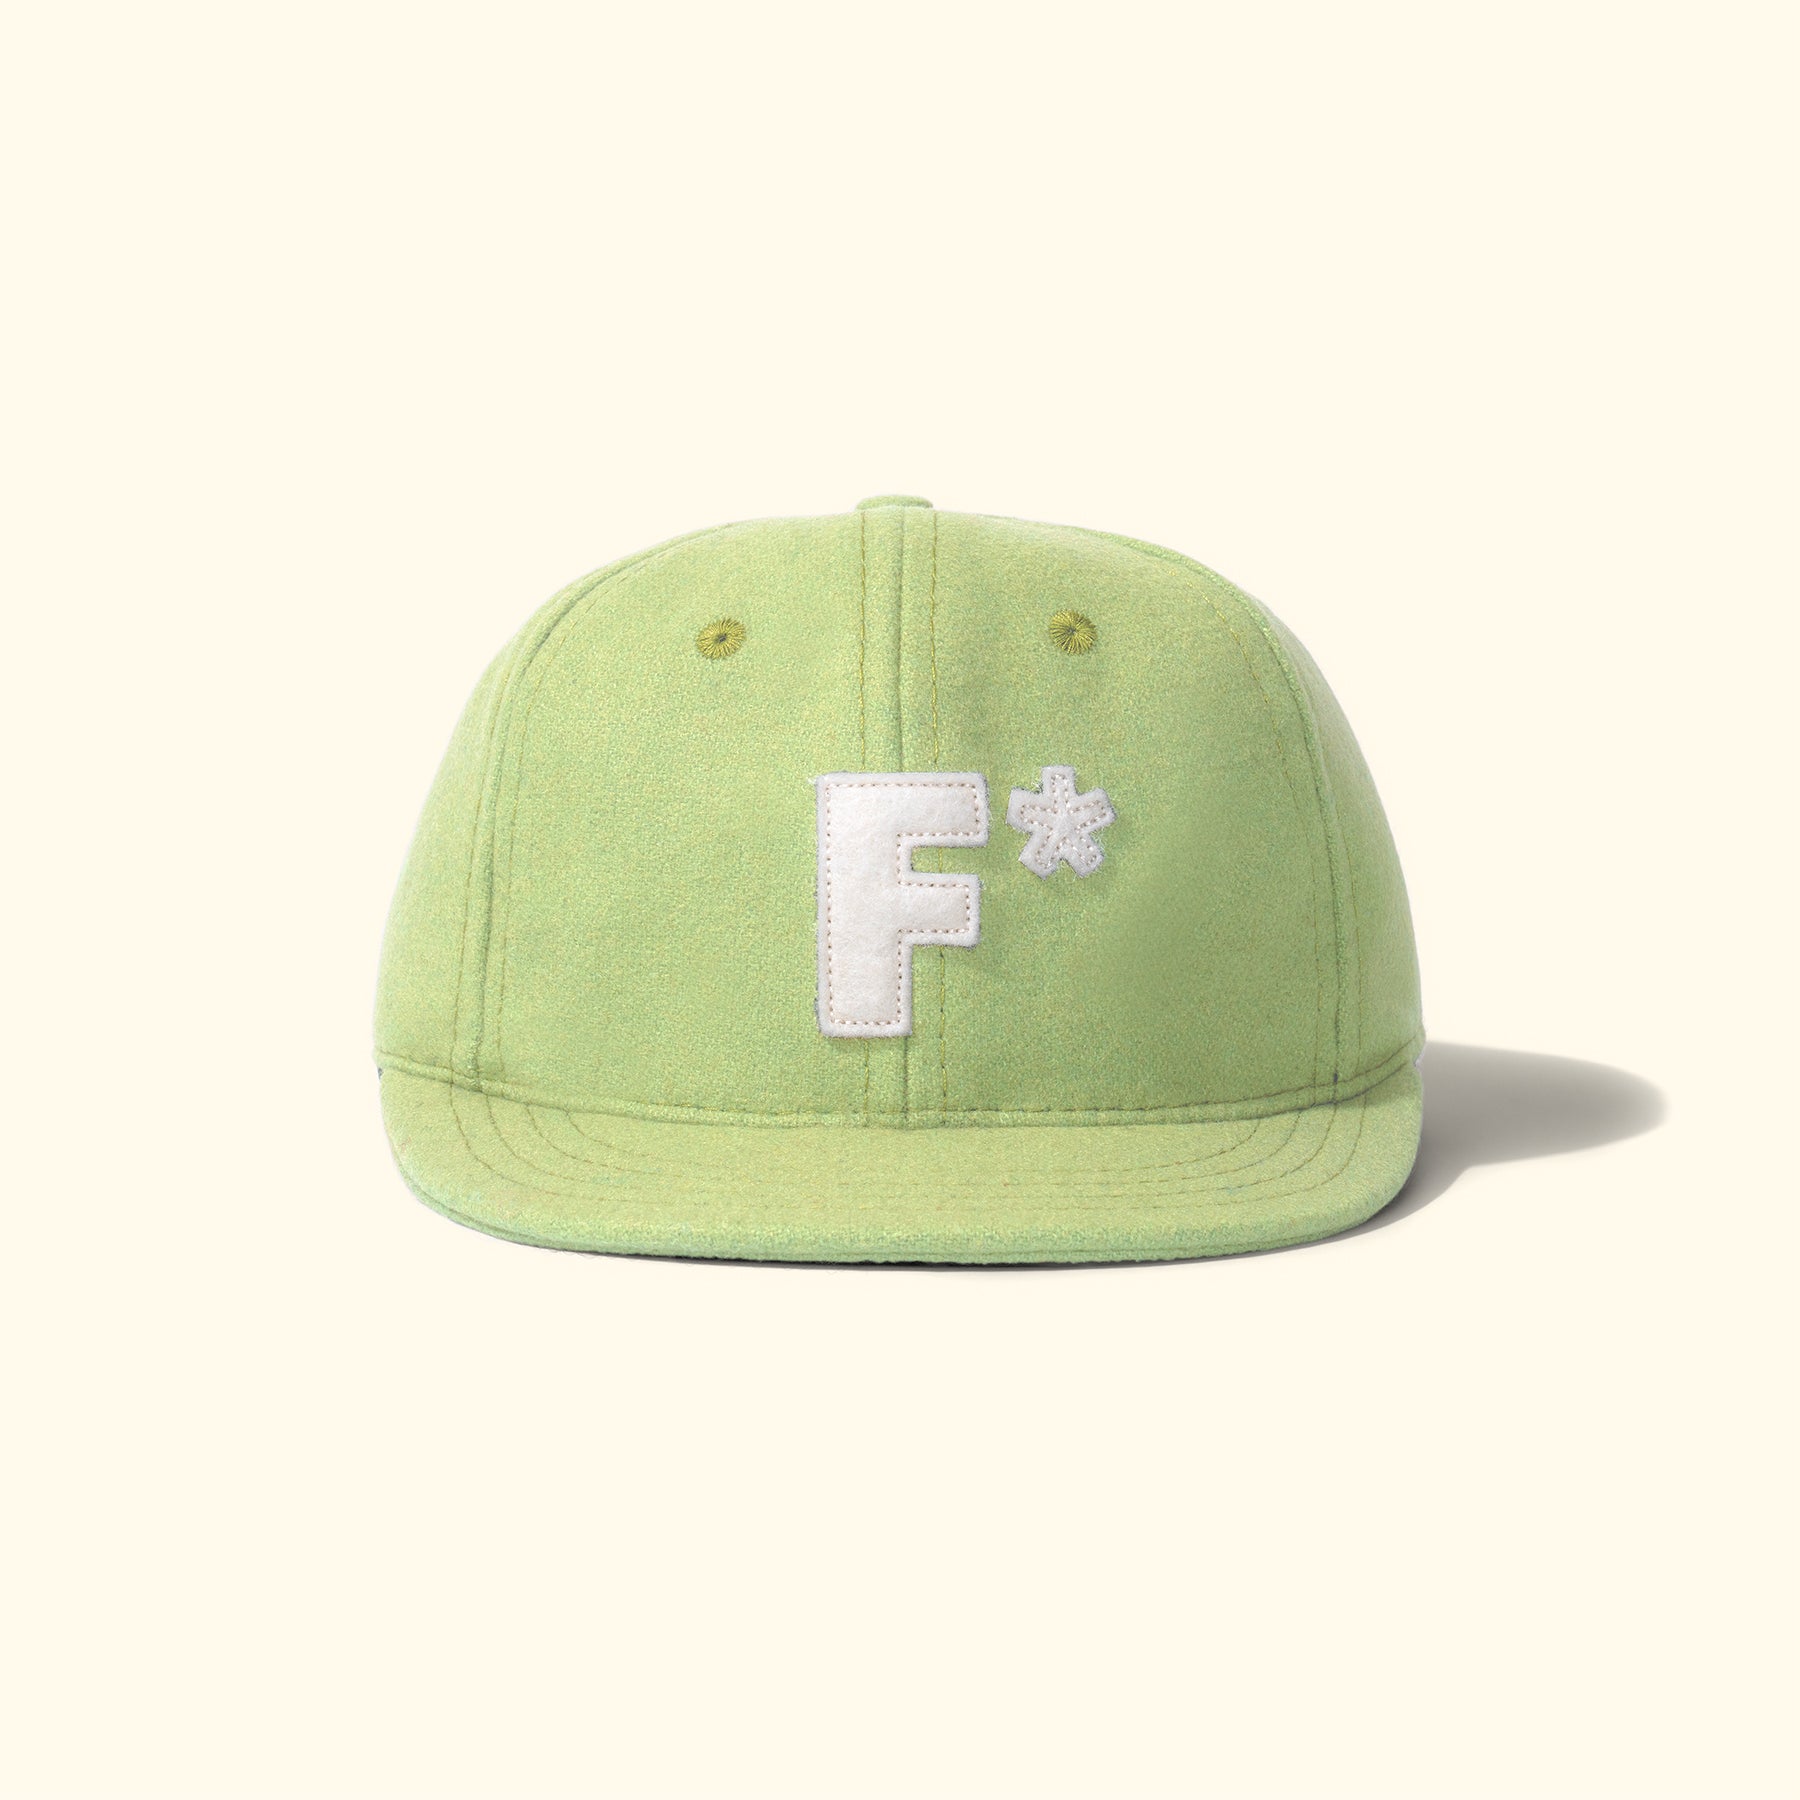 Ebbets F* Fitted Cap Mint